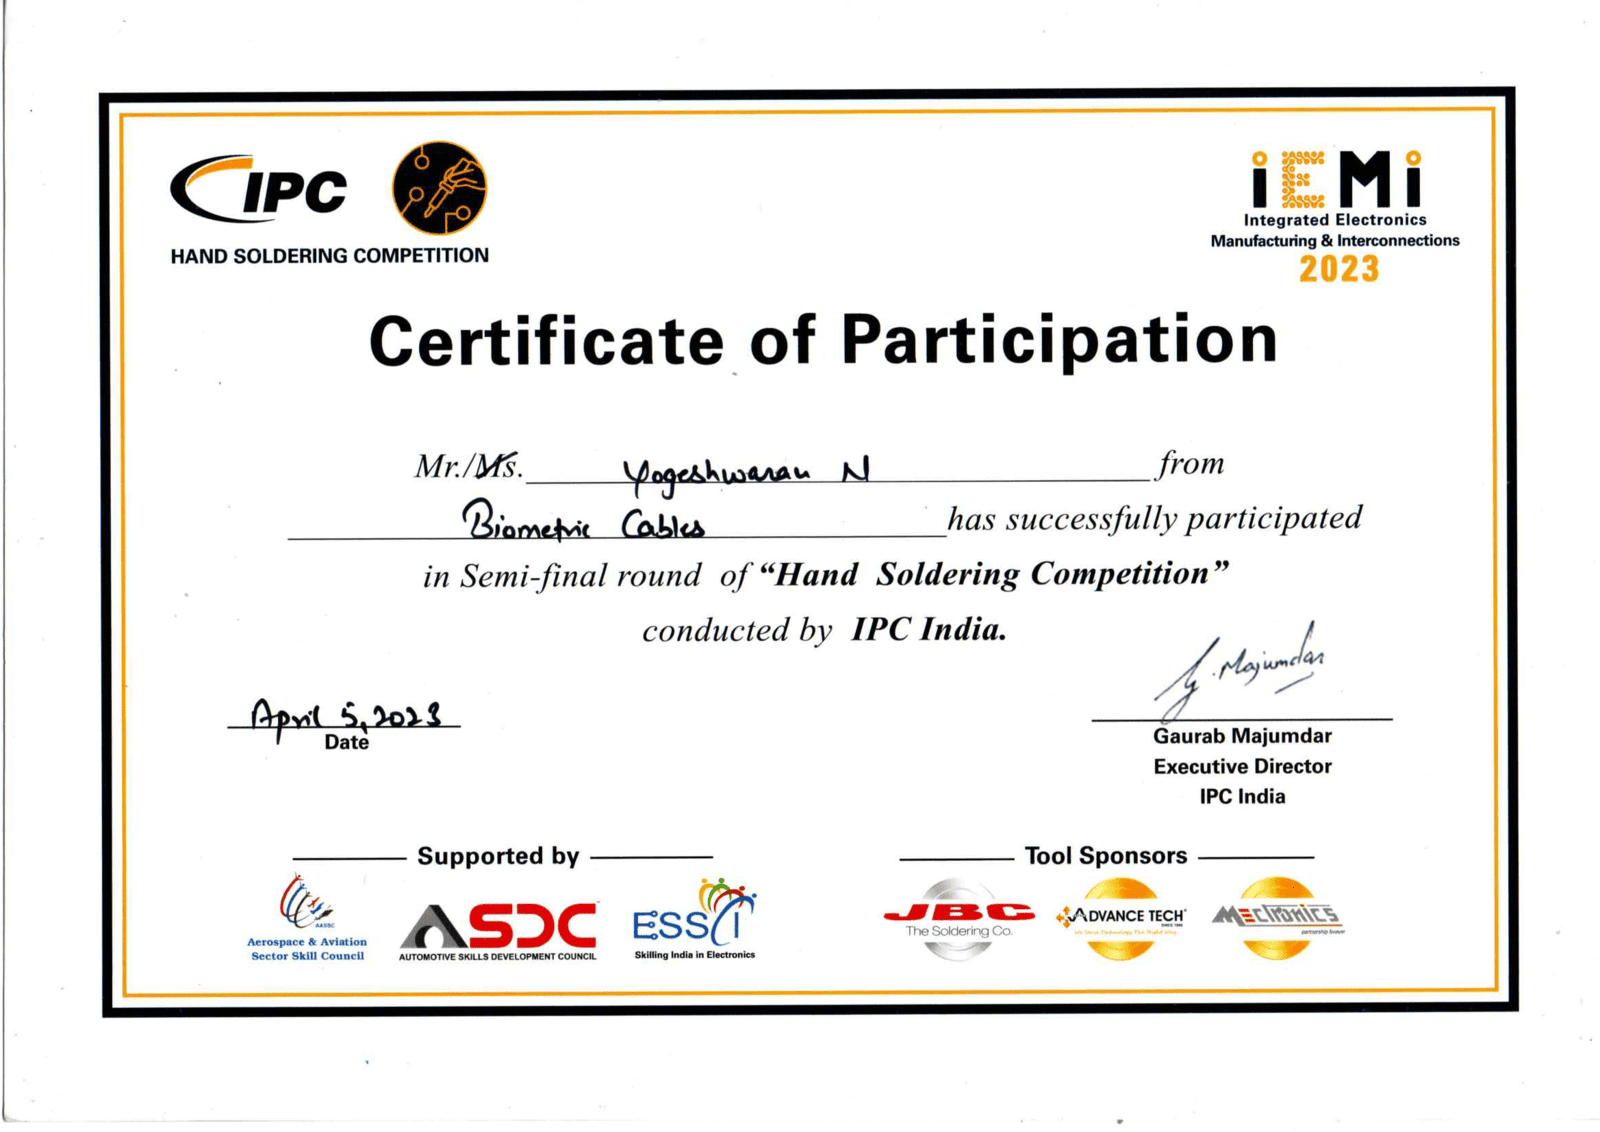 IPC Hand Soldering Competition